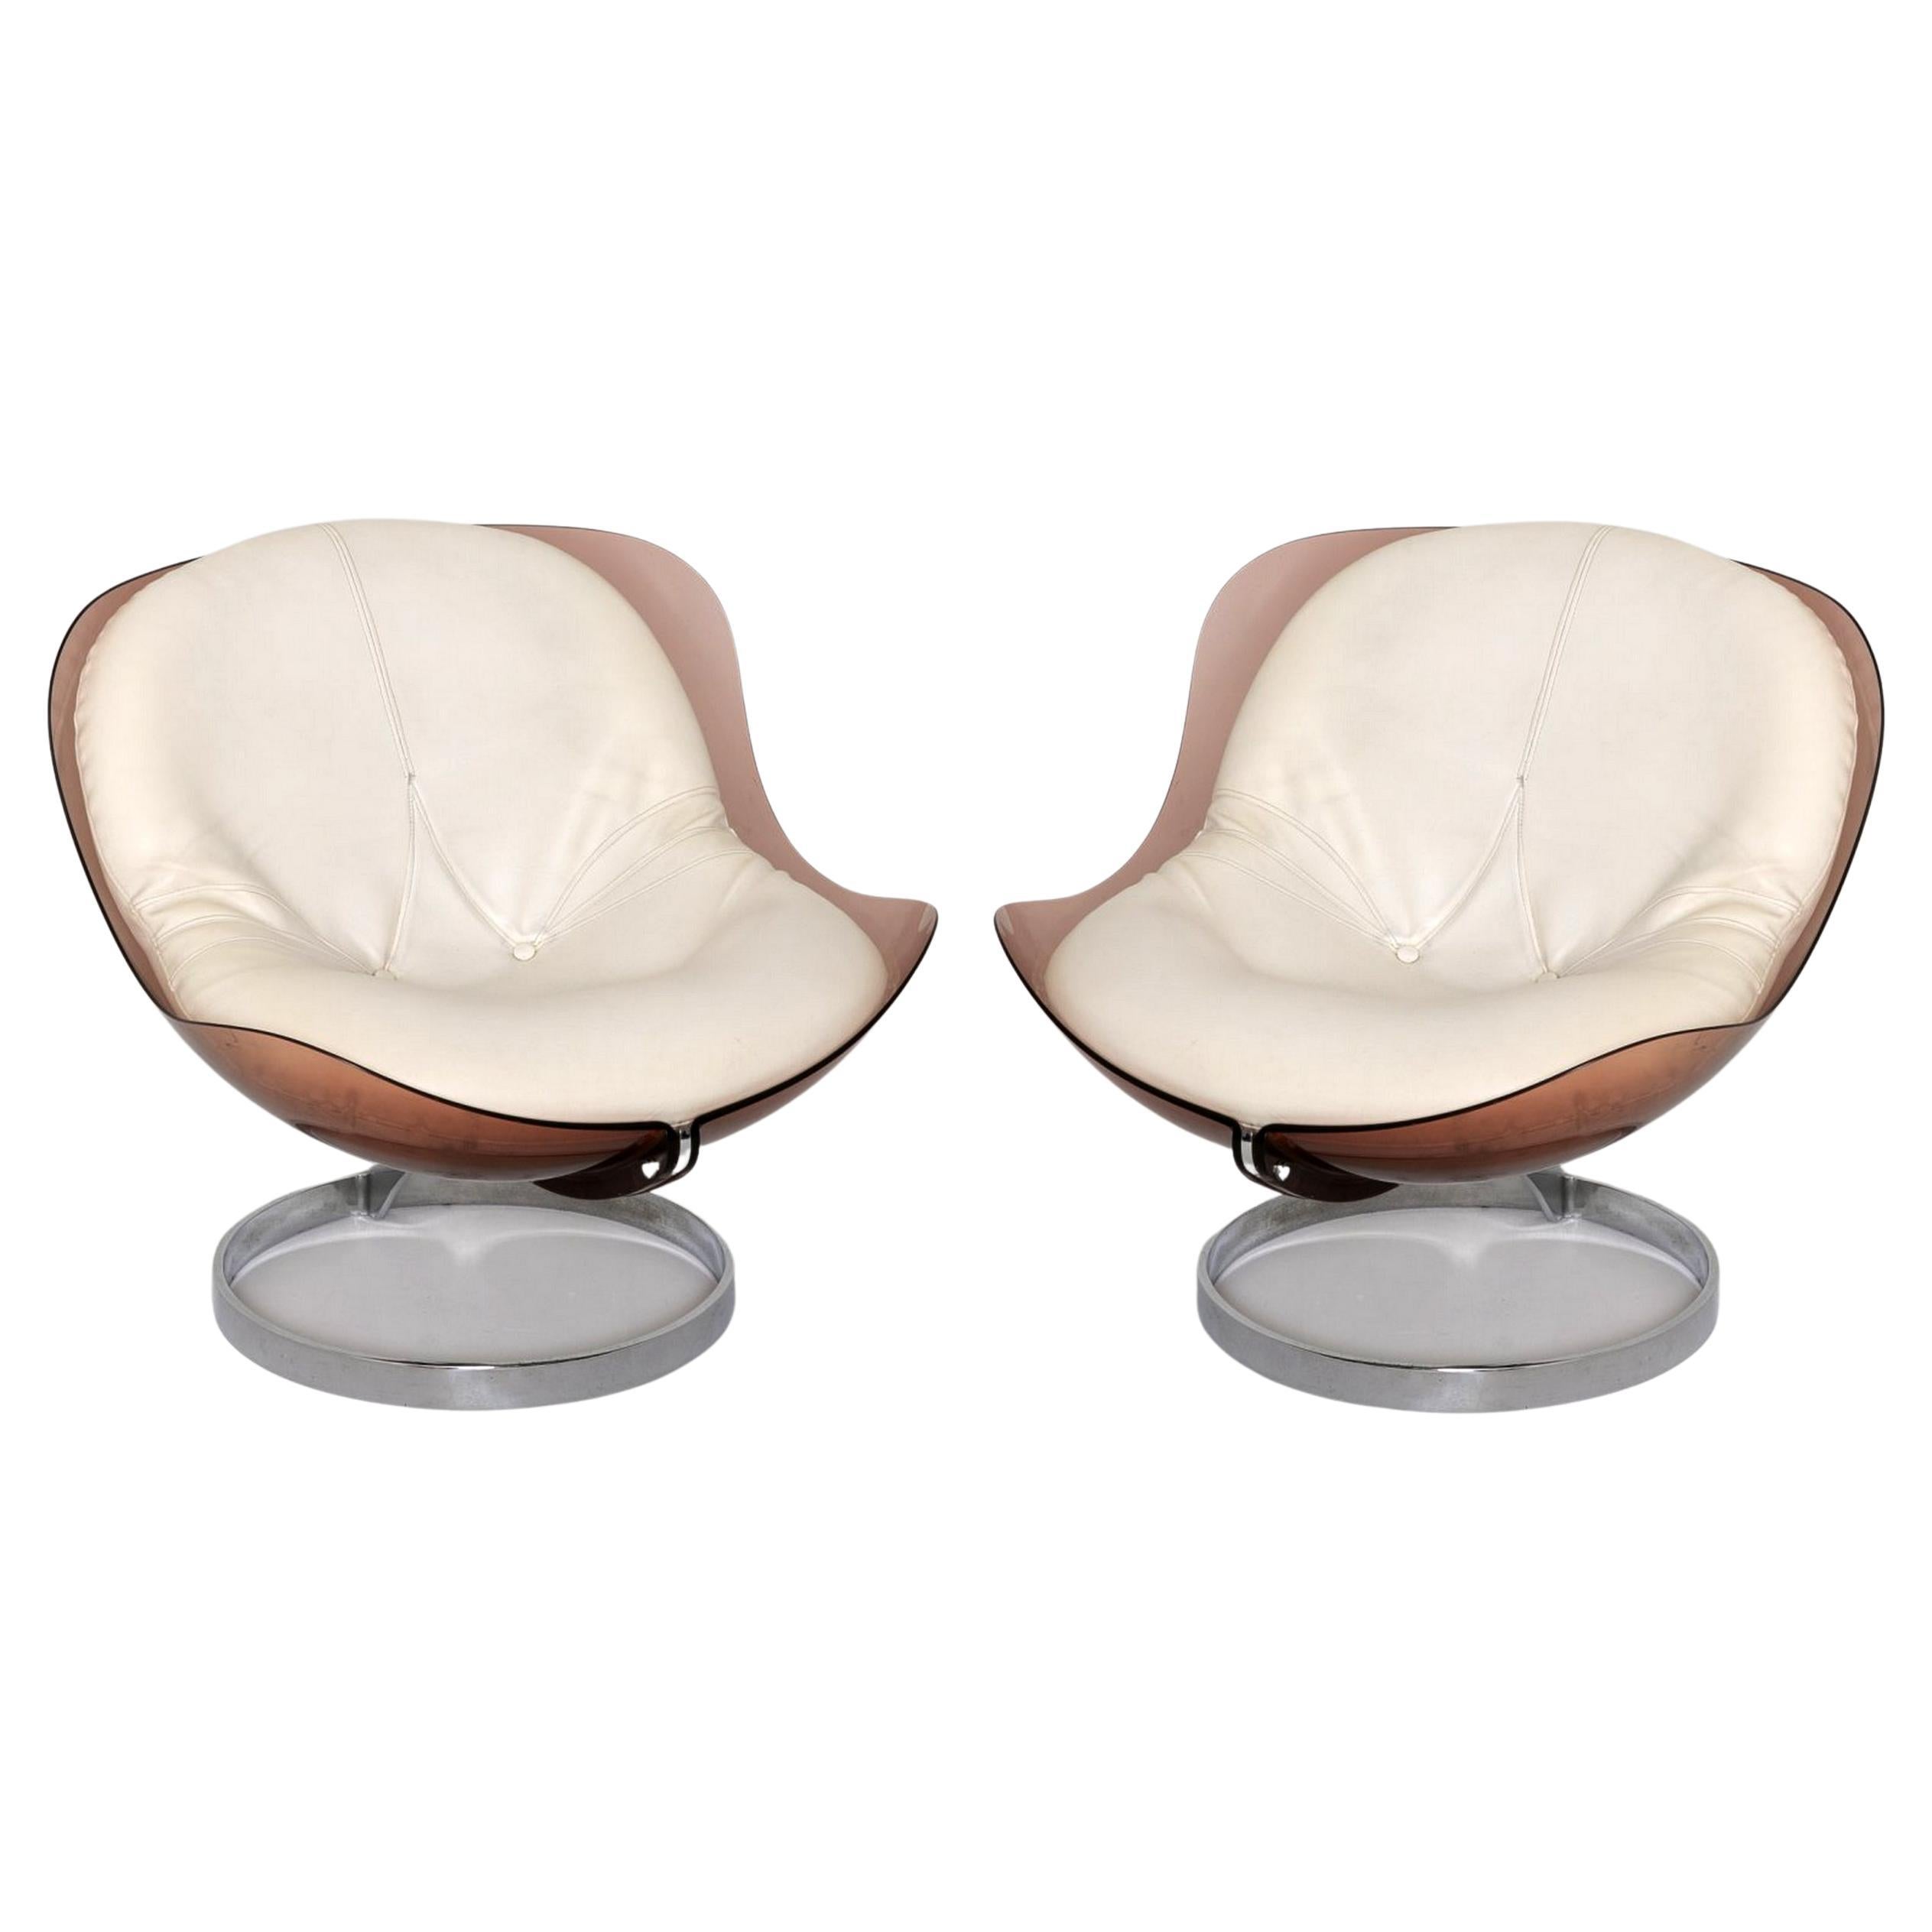 Pair of low armchairs by B.Tabacoff, Ed. Mobilier Modulaire Moderne, France 1971